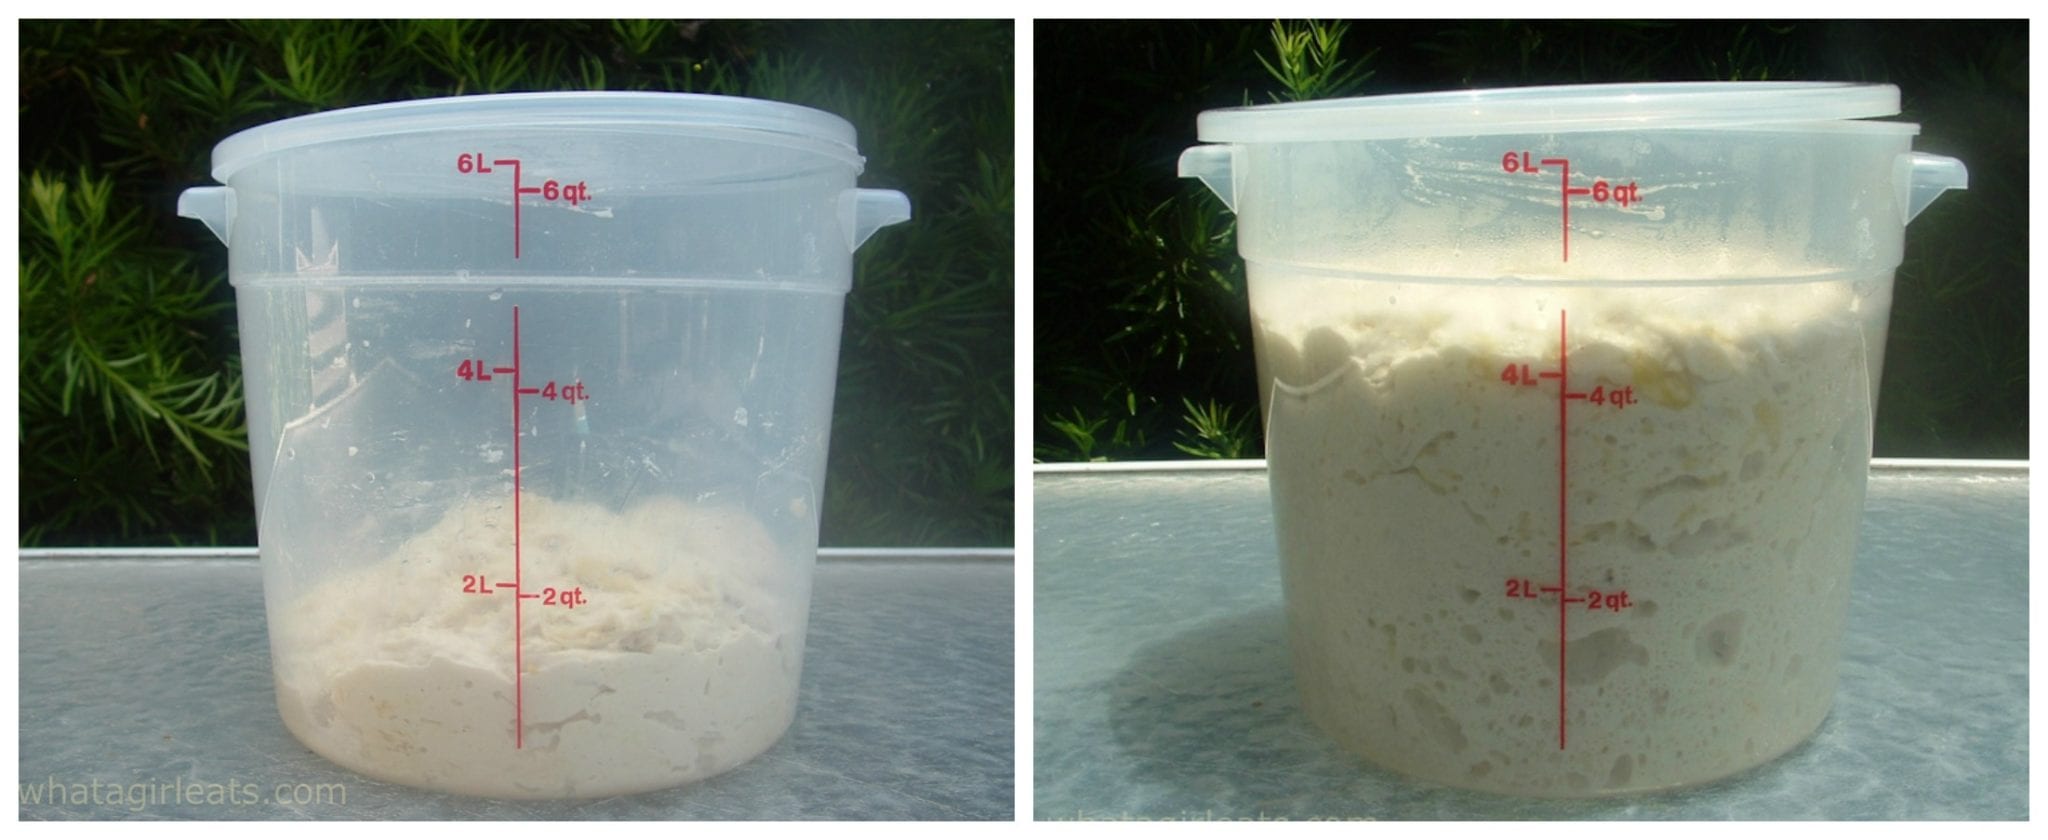 Pizza dough before and after rising pictures in a bucket